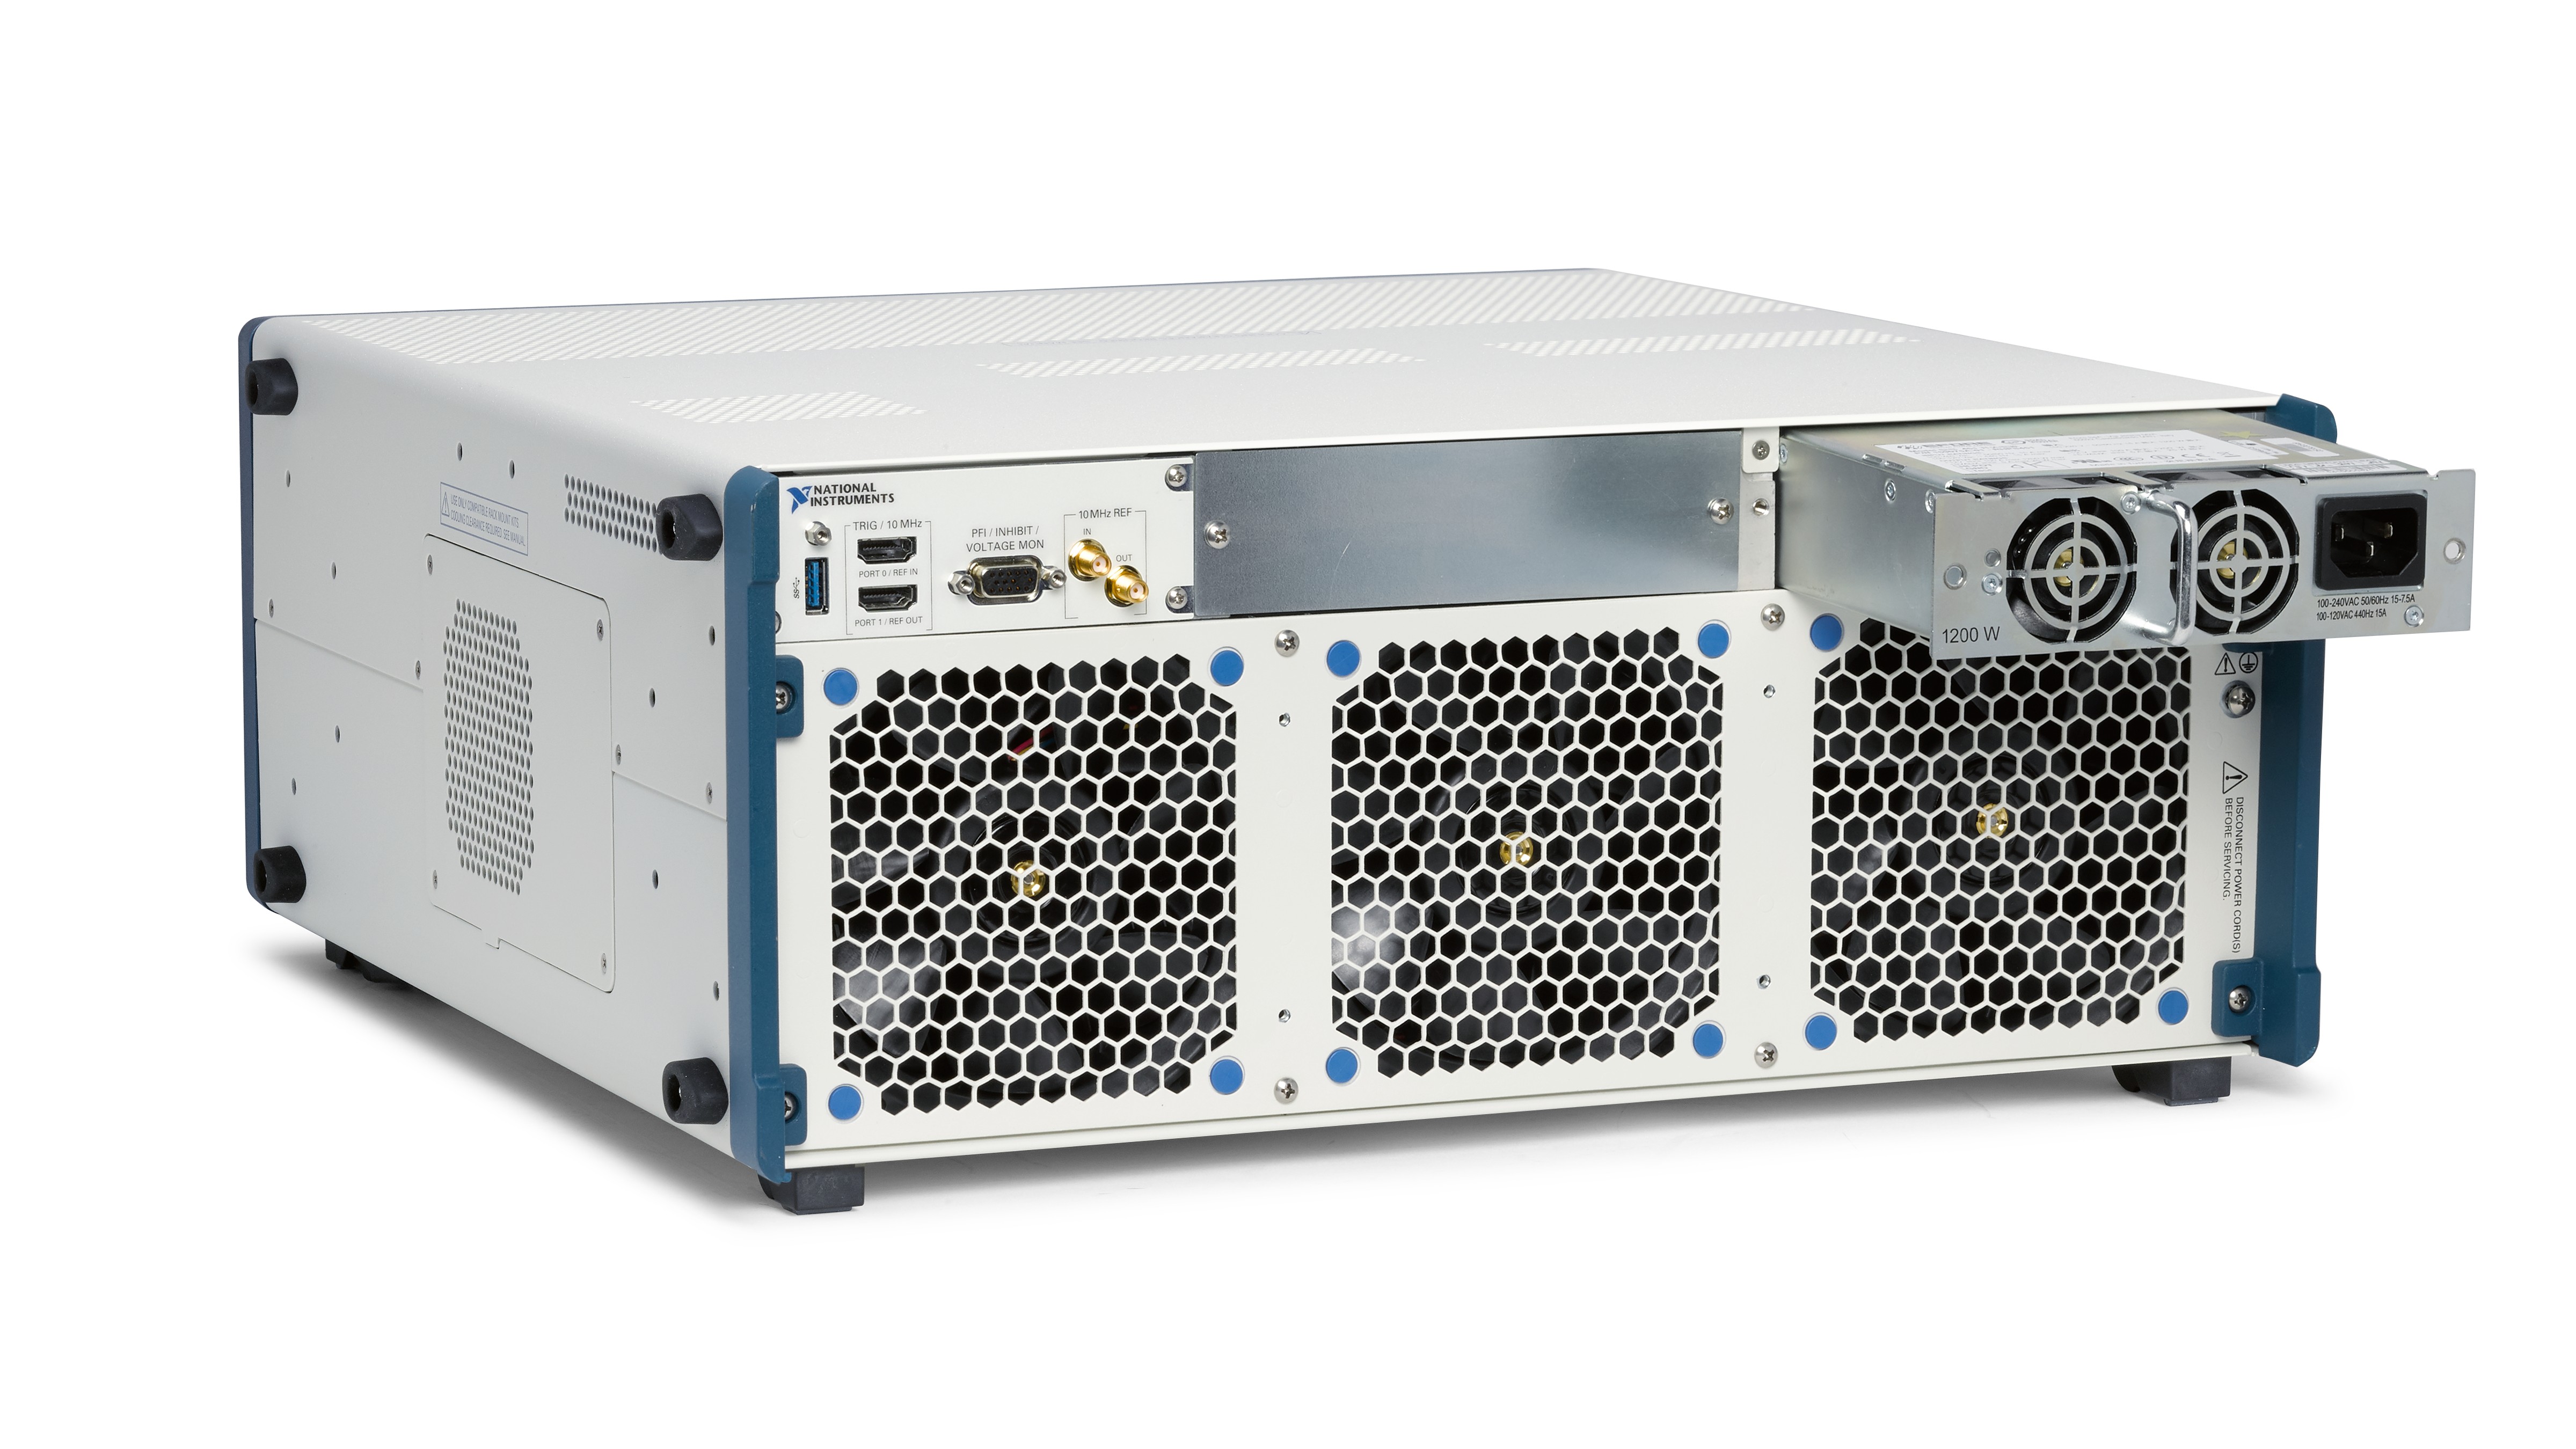 High-Uptime PXI Chassis With Redundant Fans and Power Supplies